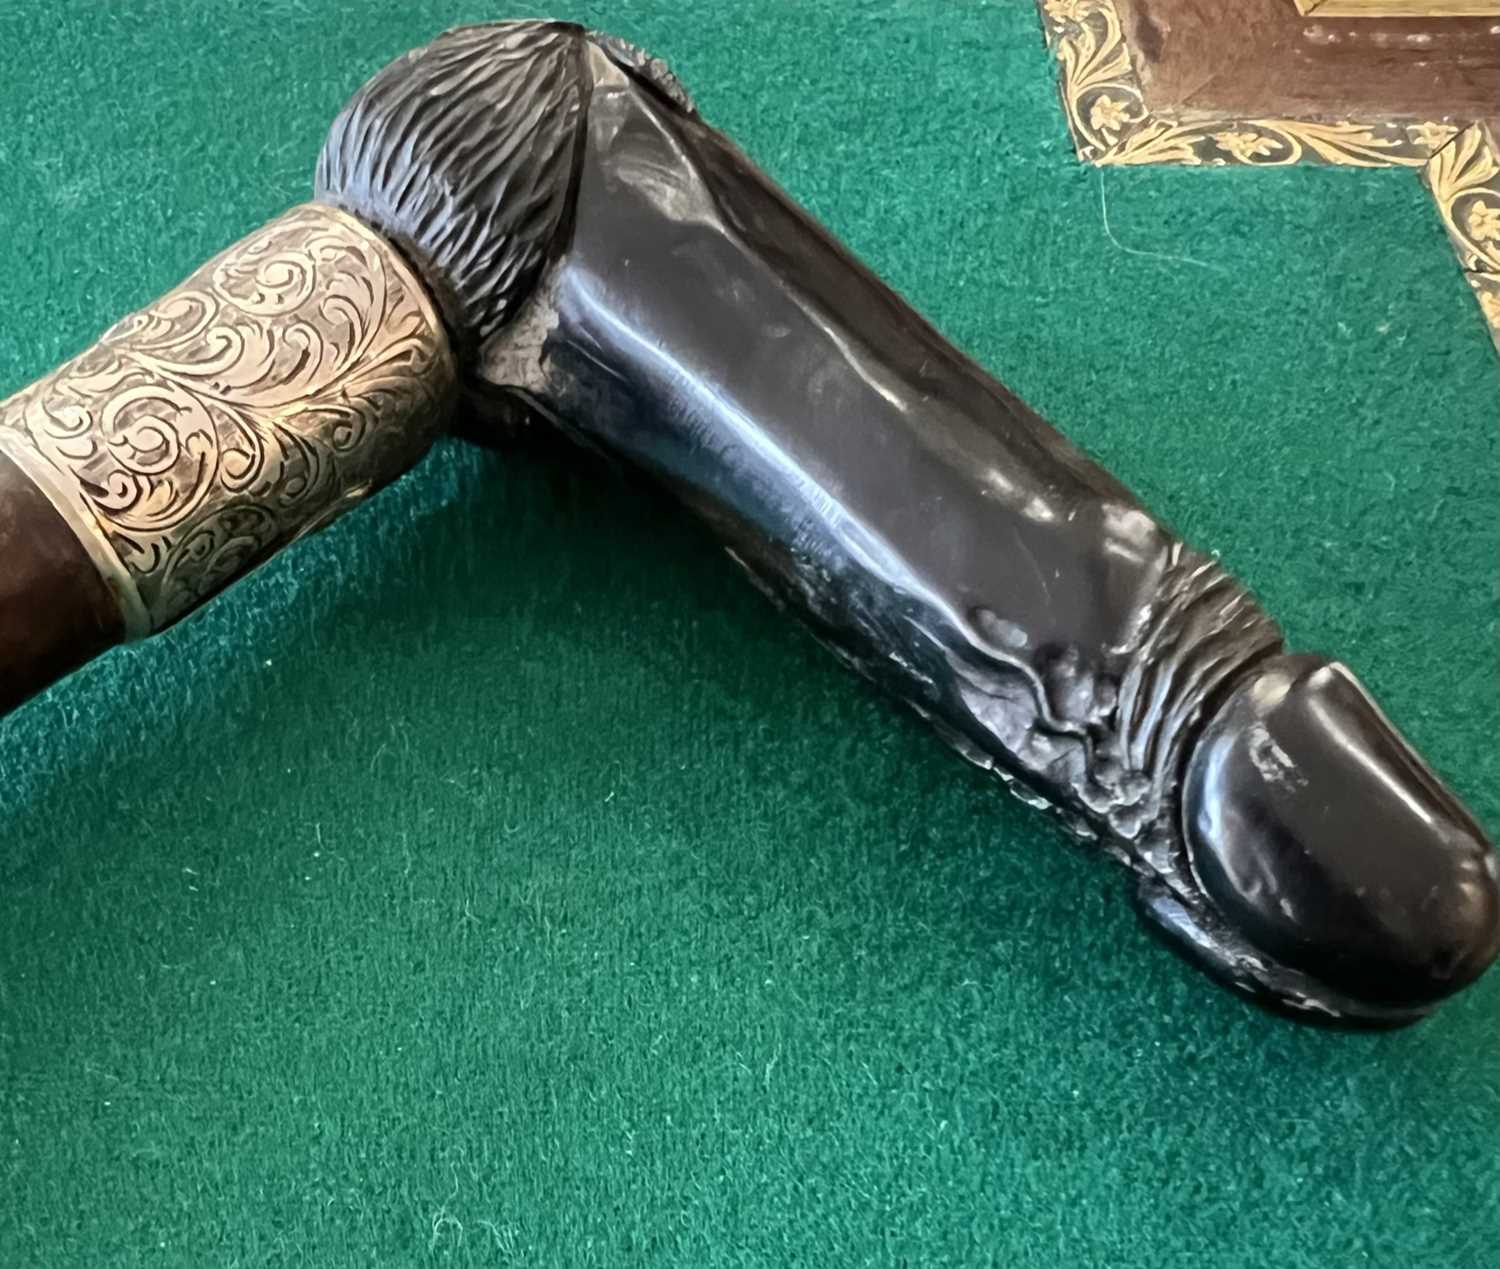 A LATE 19TH CENTURY WALKING CANE WITH EROTIC HANDLE - Image 2 of 7